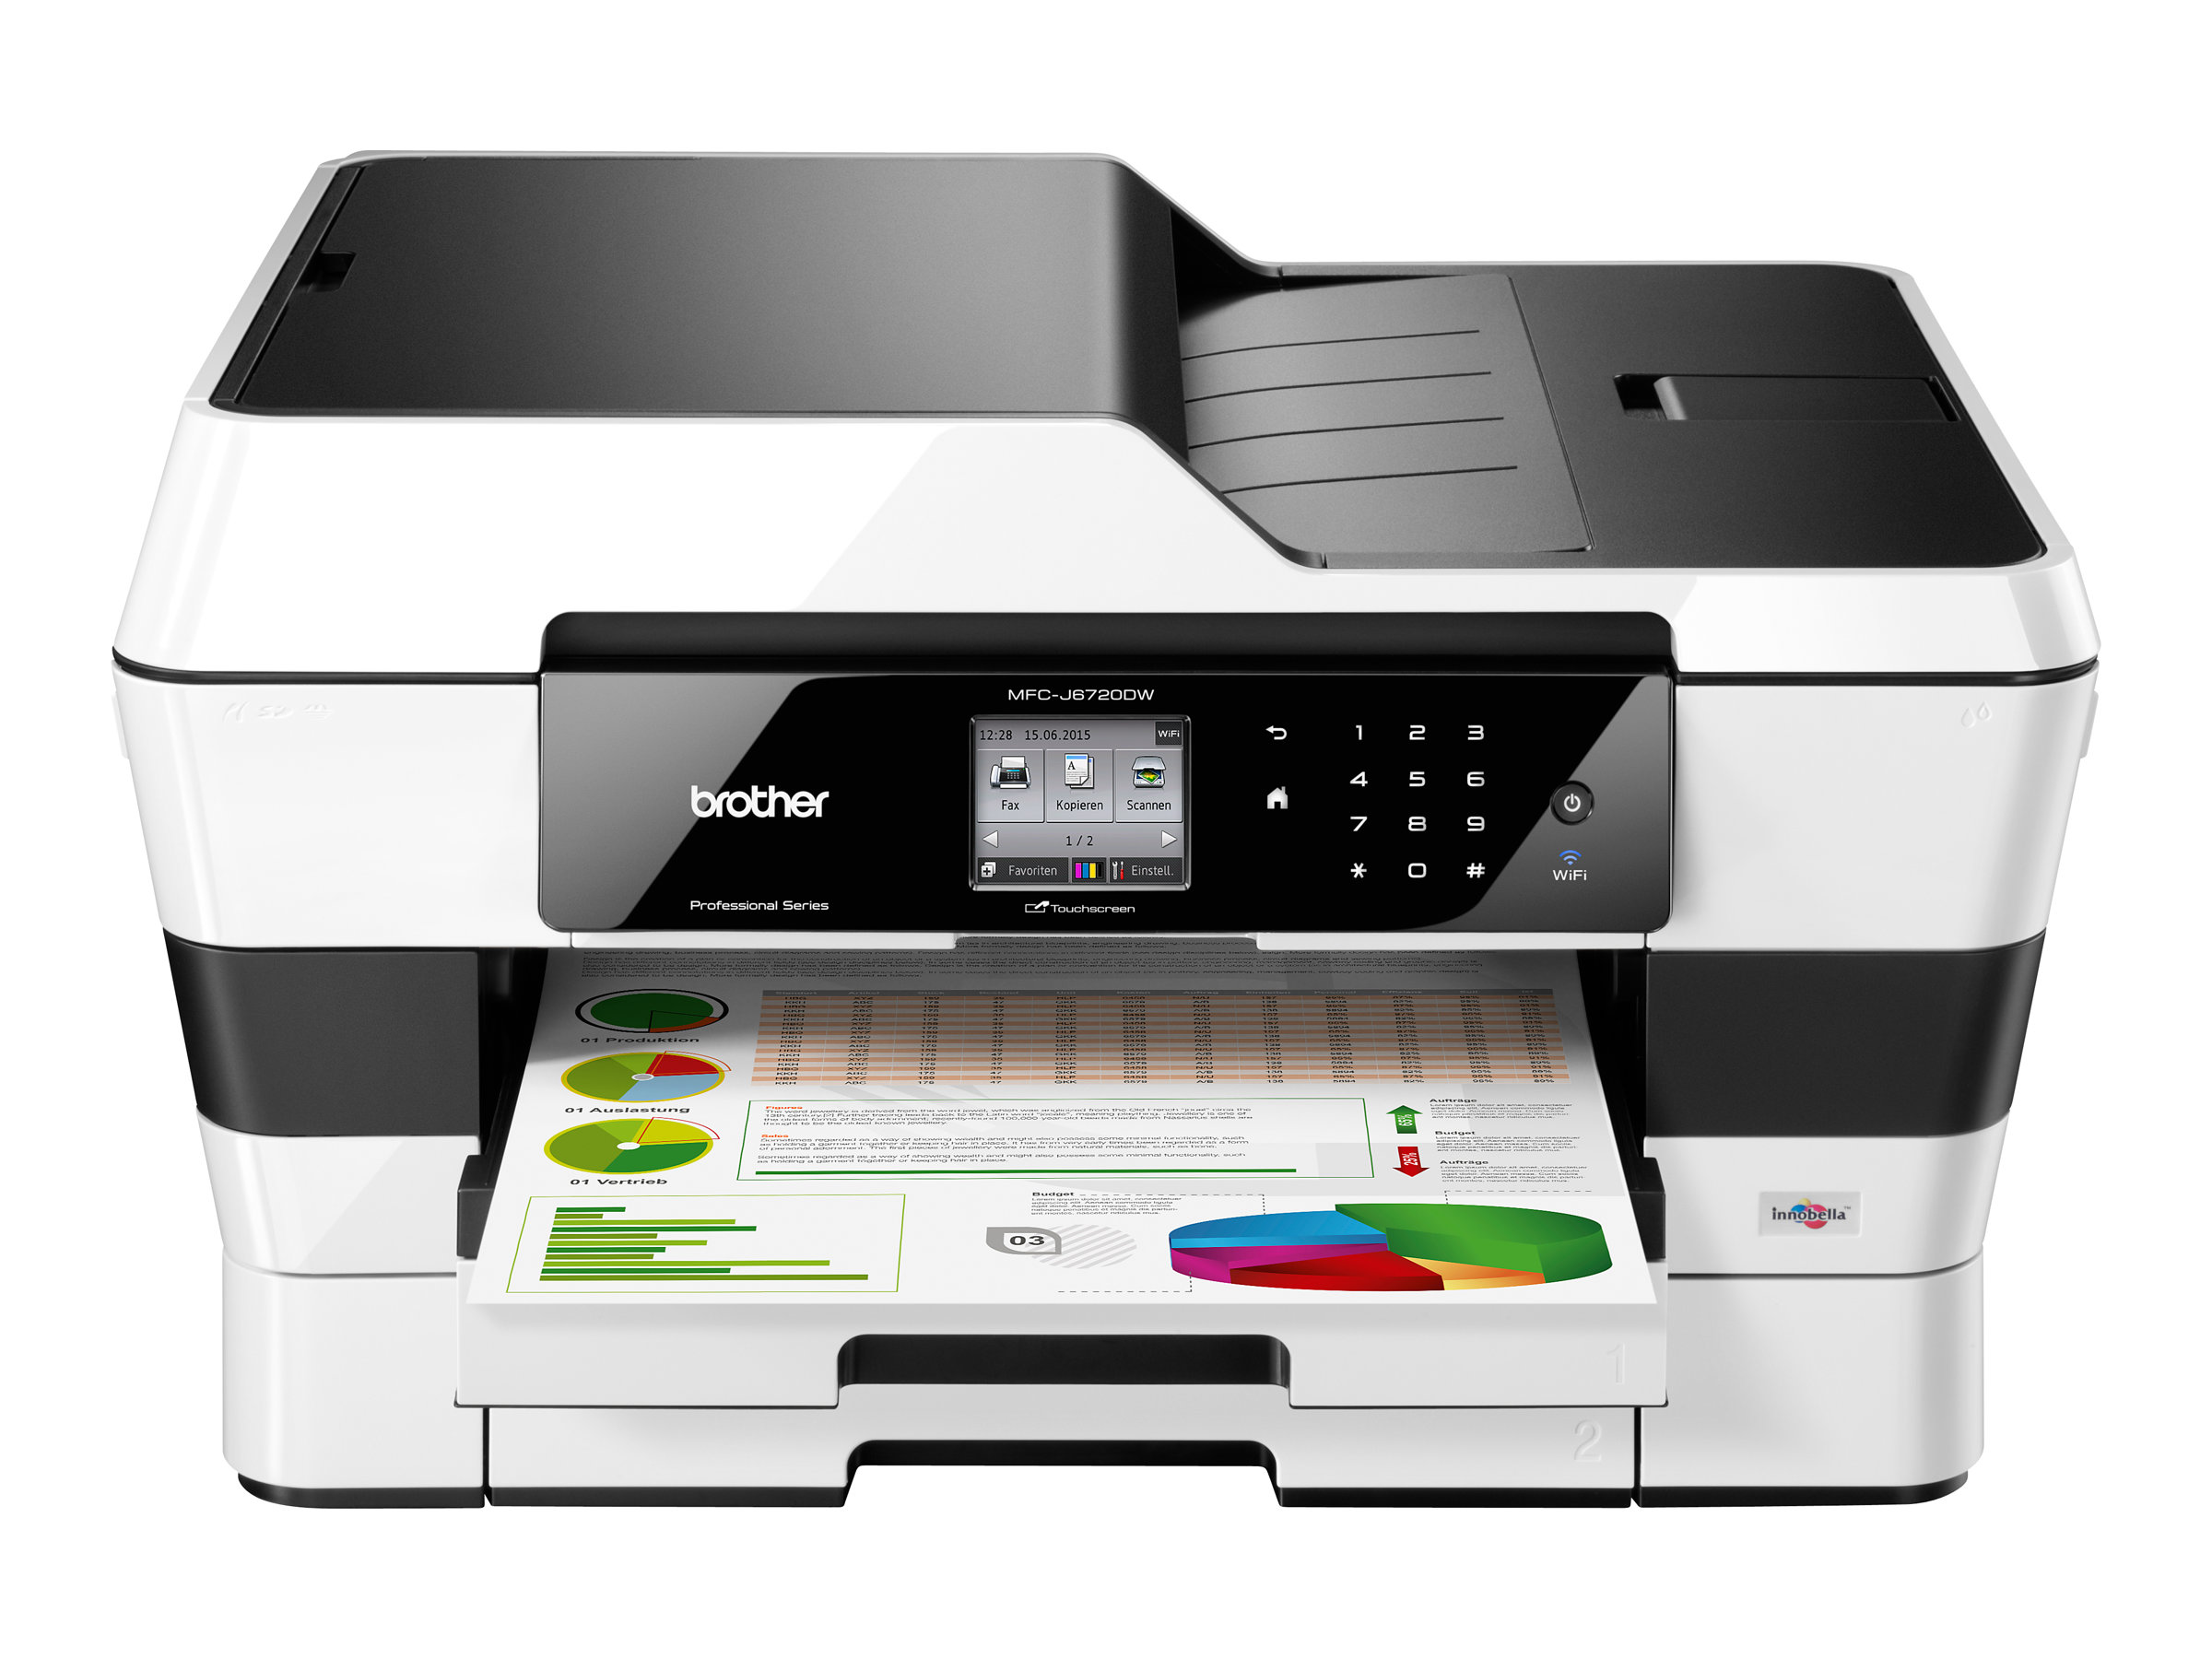 Brother MFC-J6720DW Wireless Inkjet Color Printer with Scanner, Copier and Fax - image 5 of 11